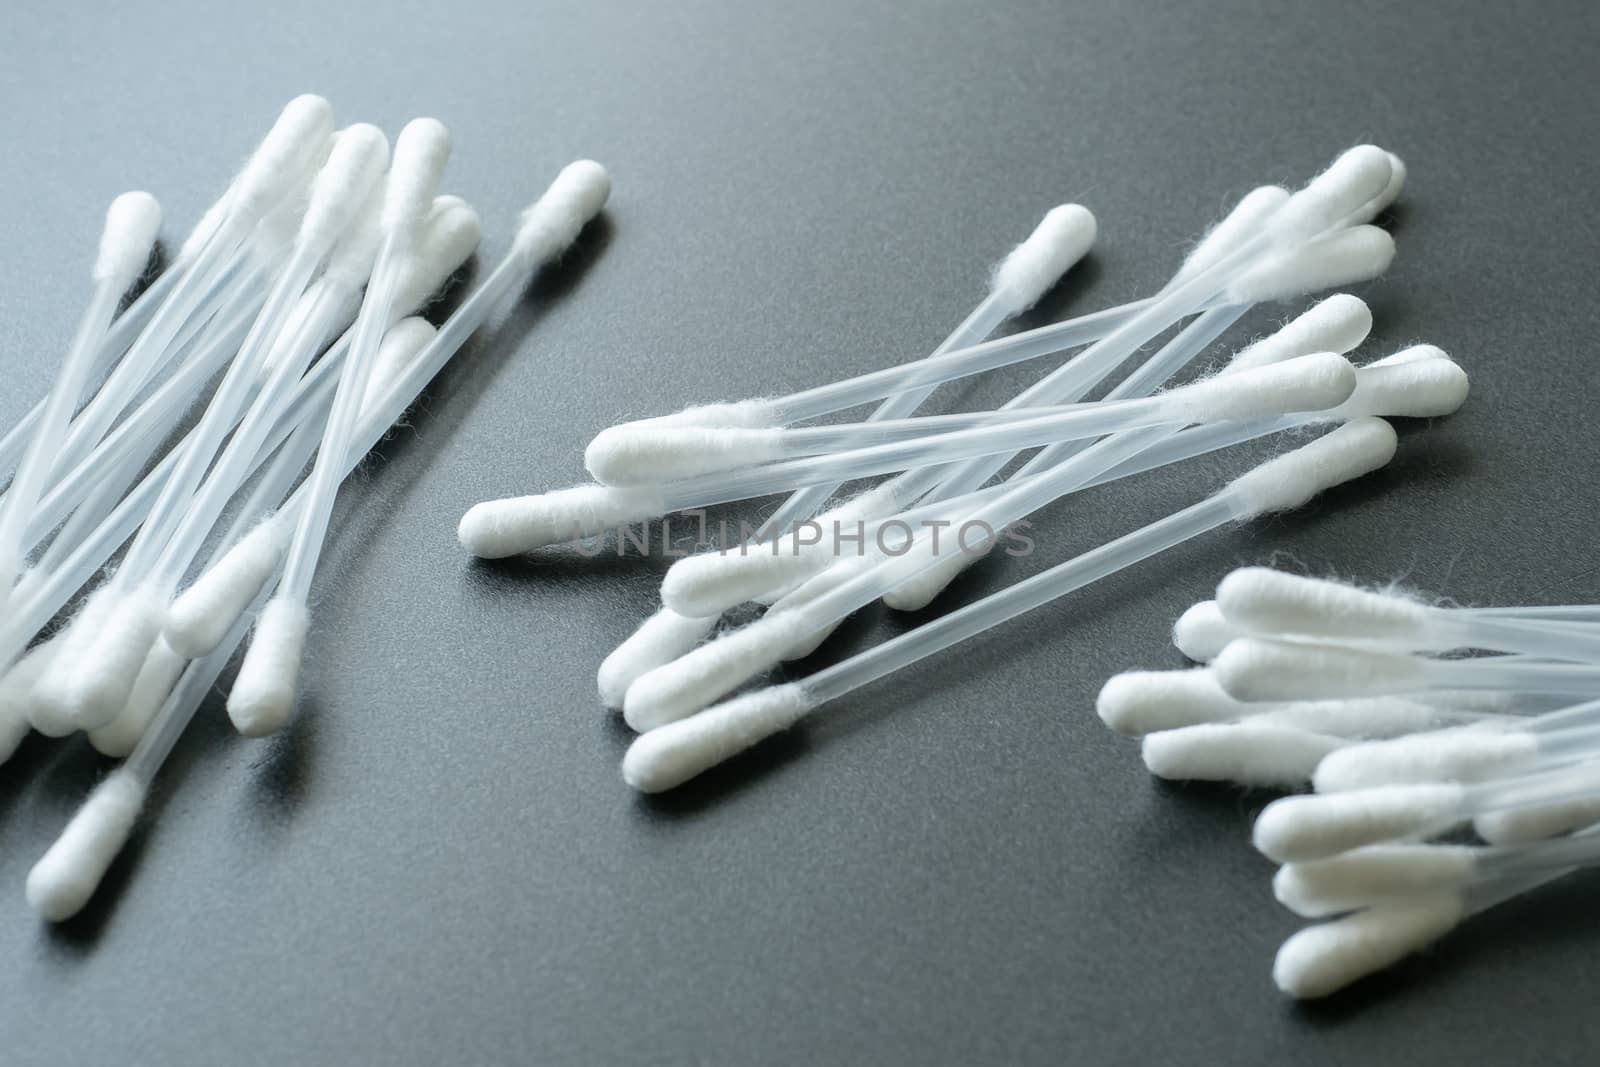 Cotton buds for cleaning ears. White cotton buds or cotton swab on black background.